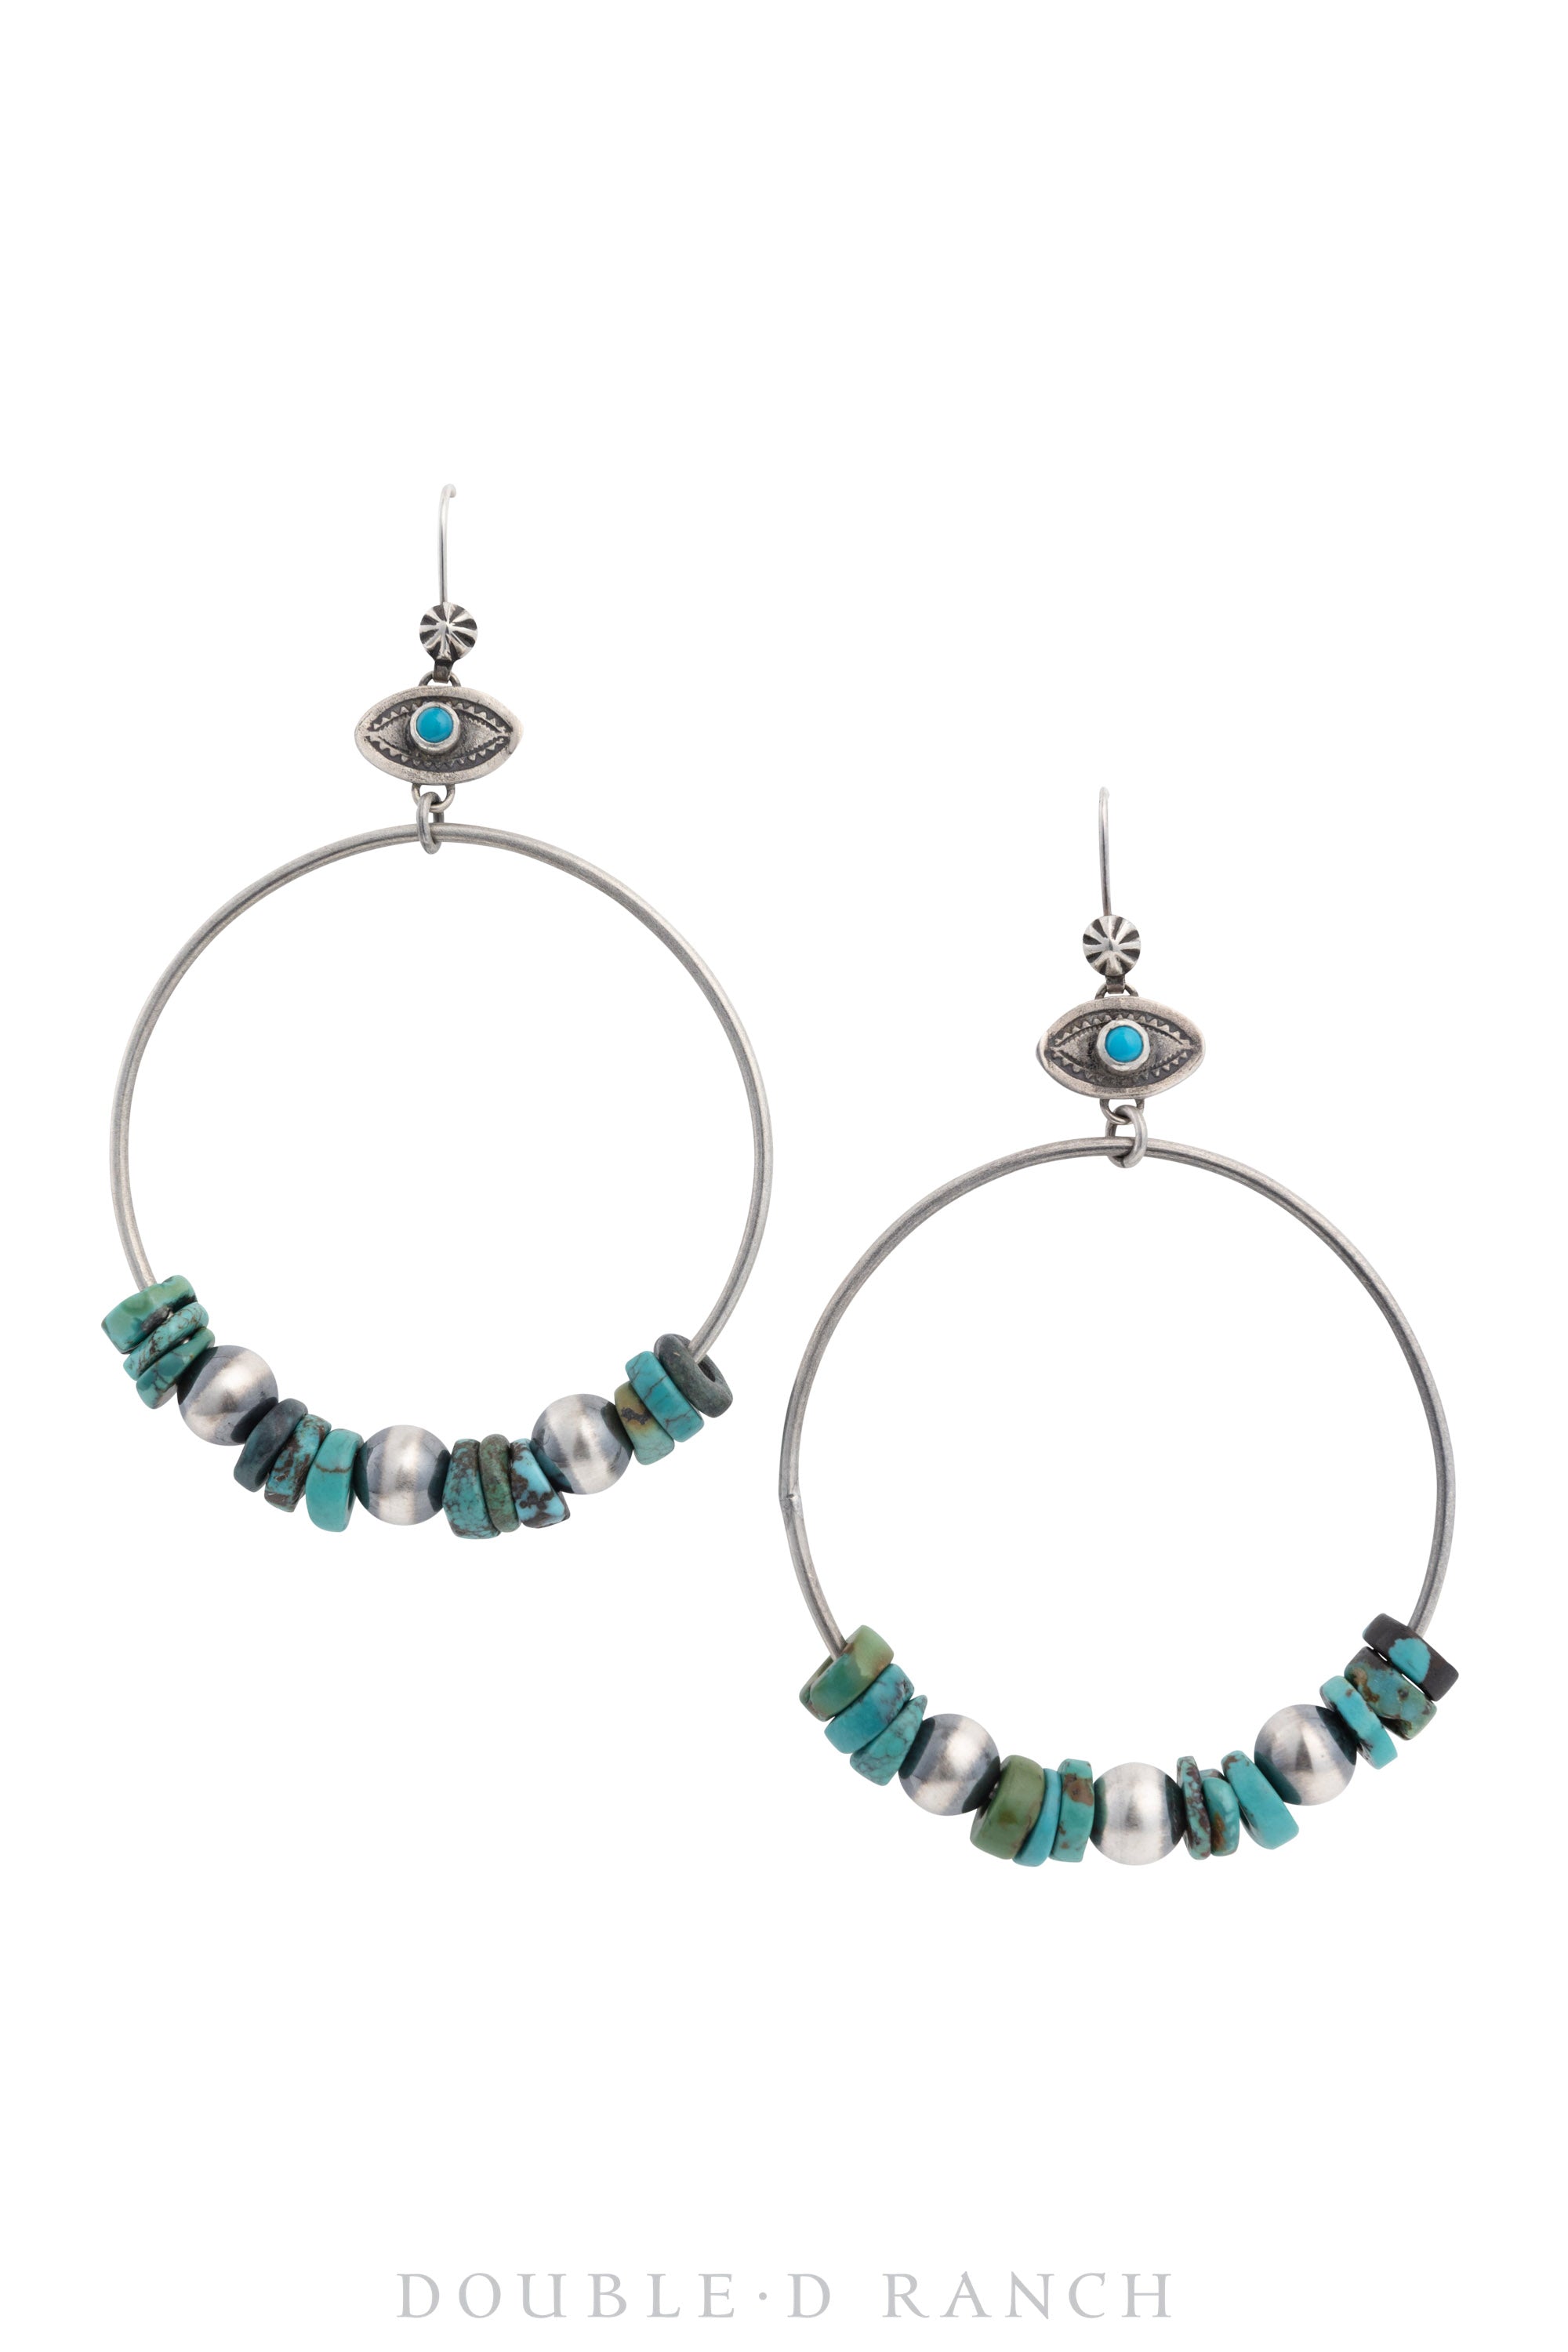 Earrings, Hoop, Turquoise, Sterling Silver, Contemporary, 1469